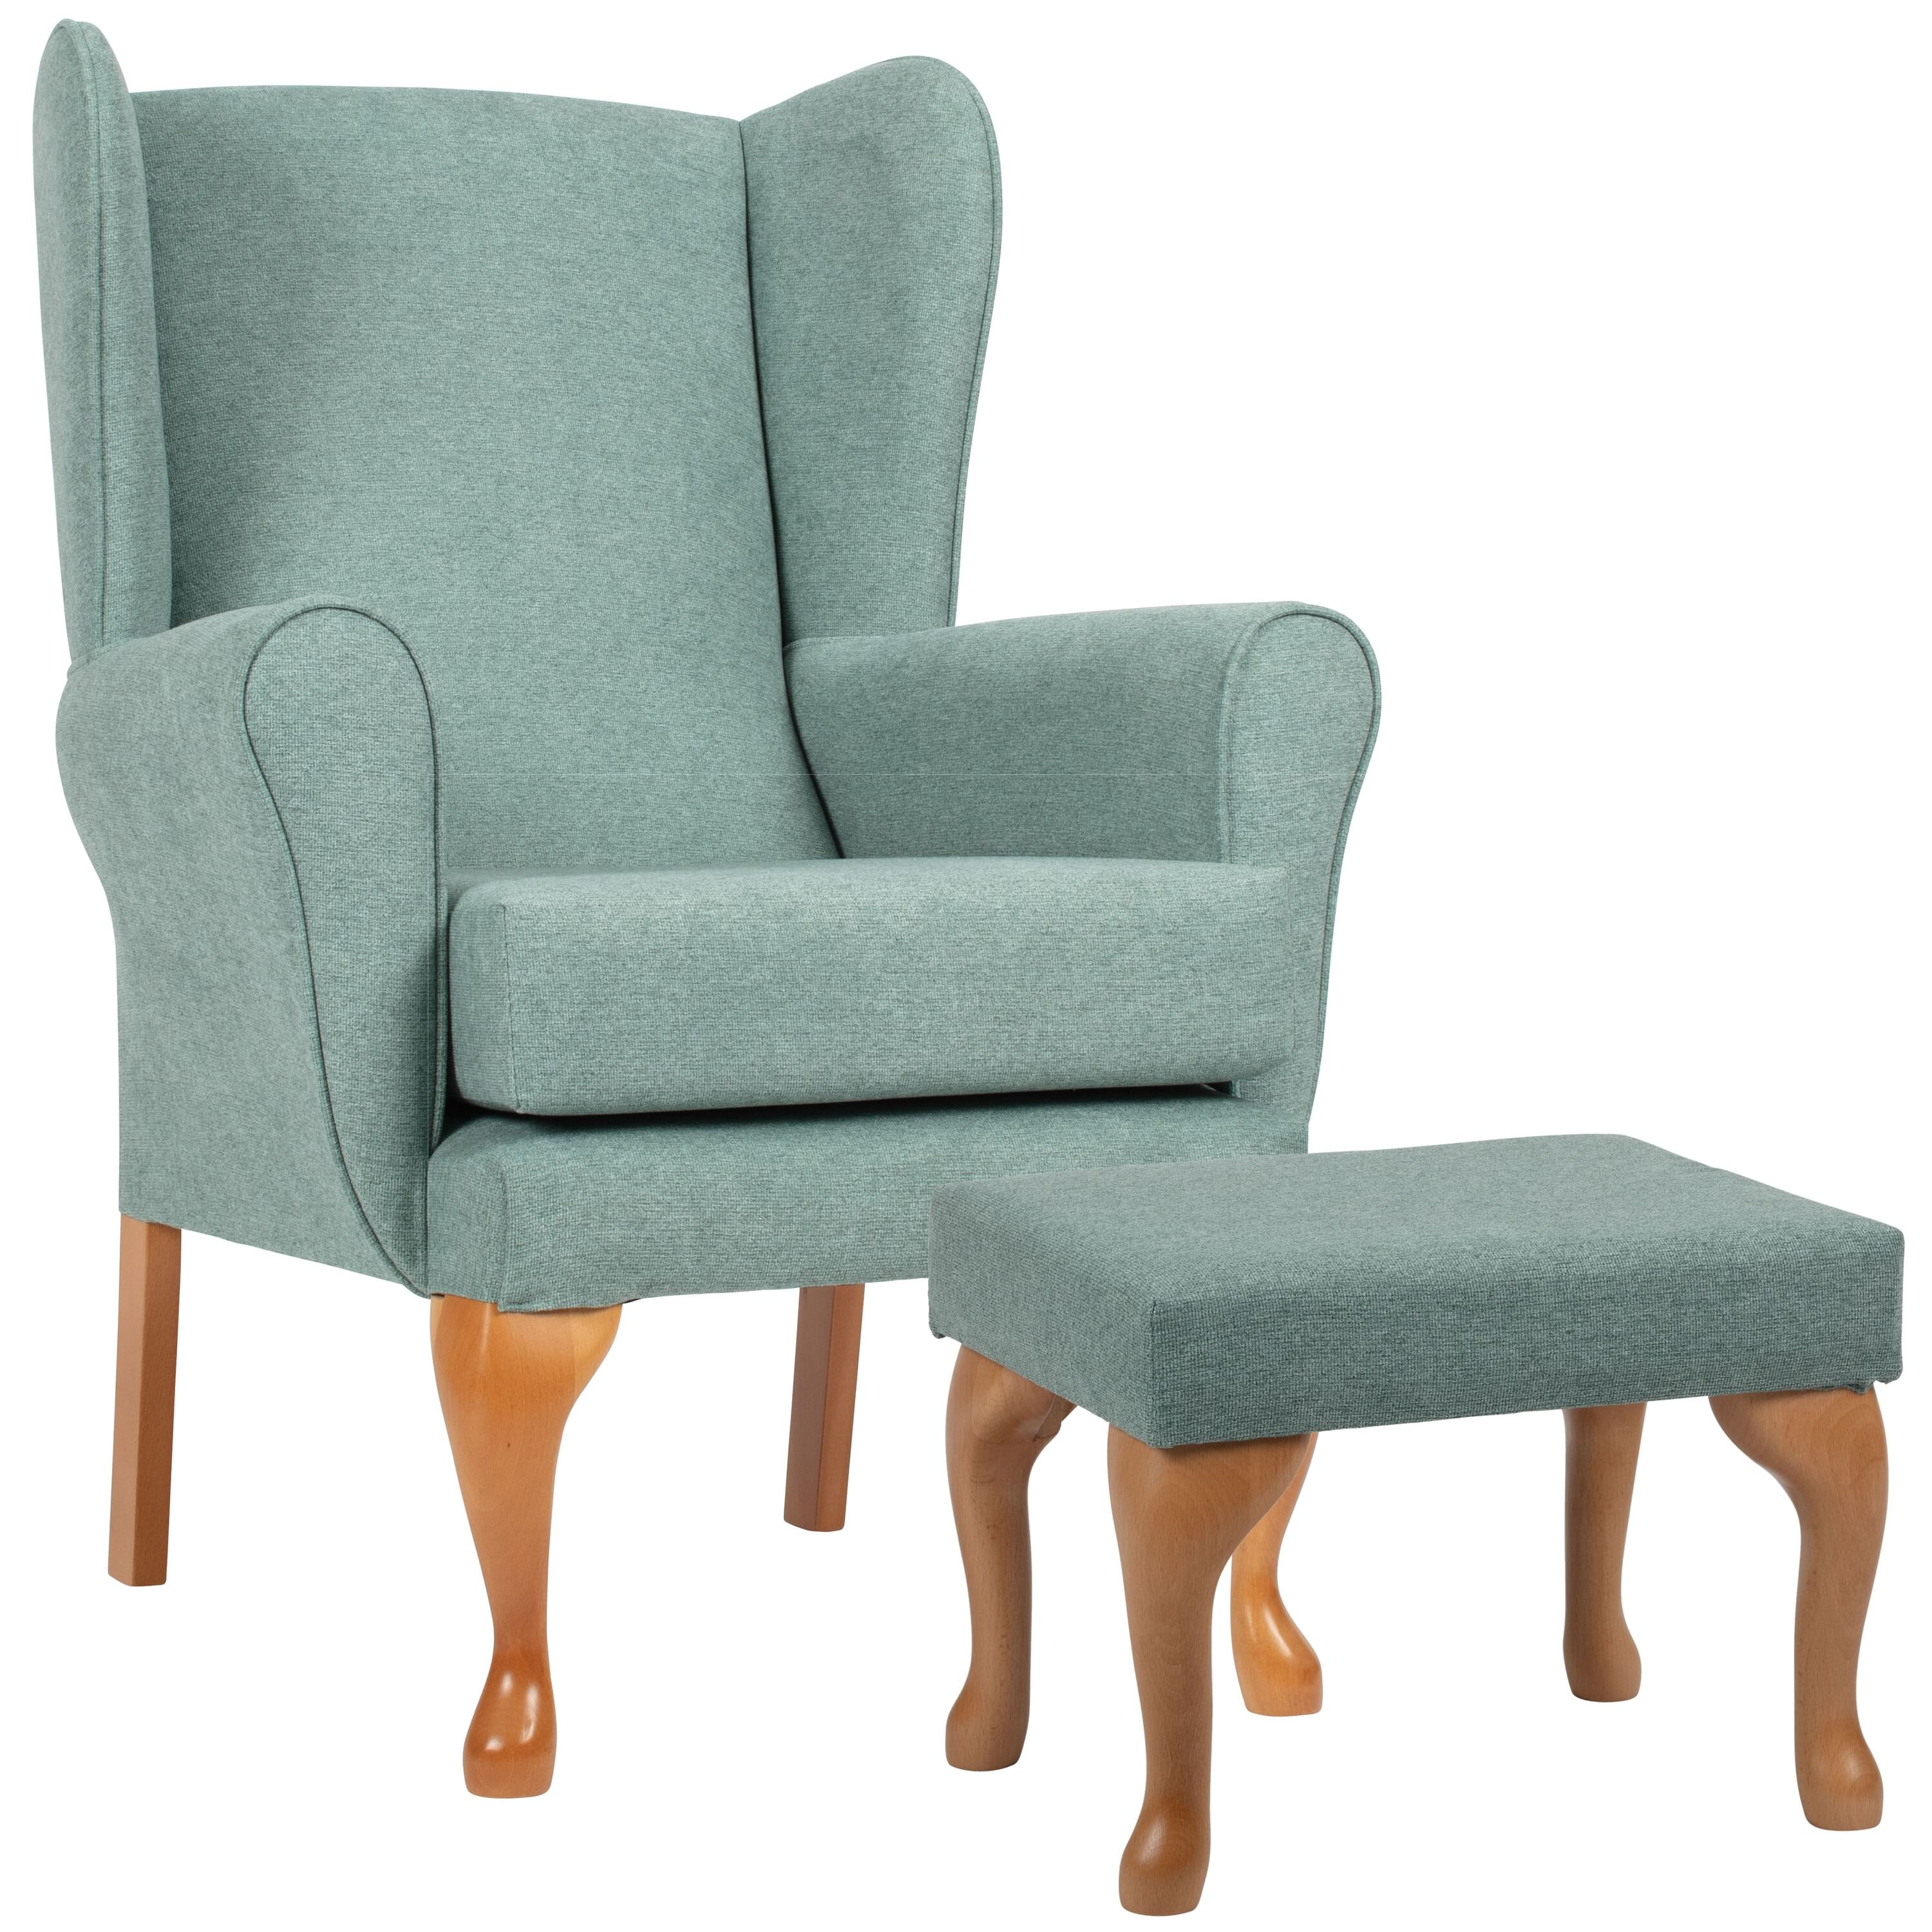 View Queen Anne Fireside Chair with Matching Footstool Green information